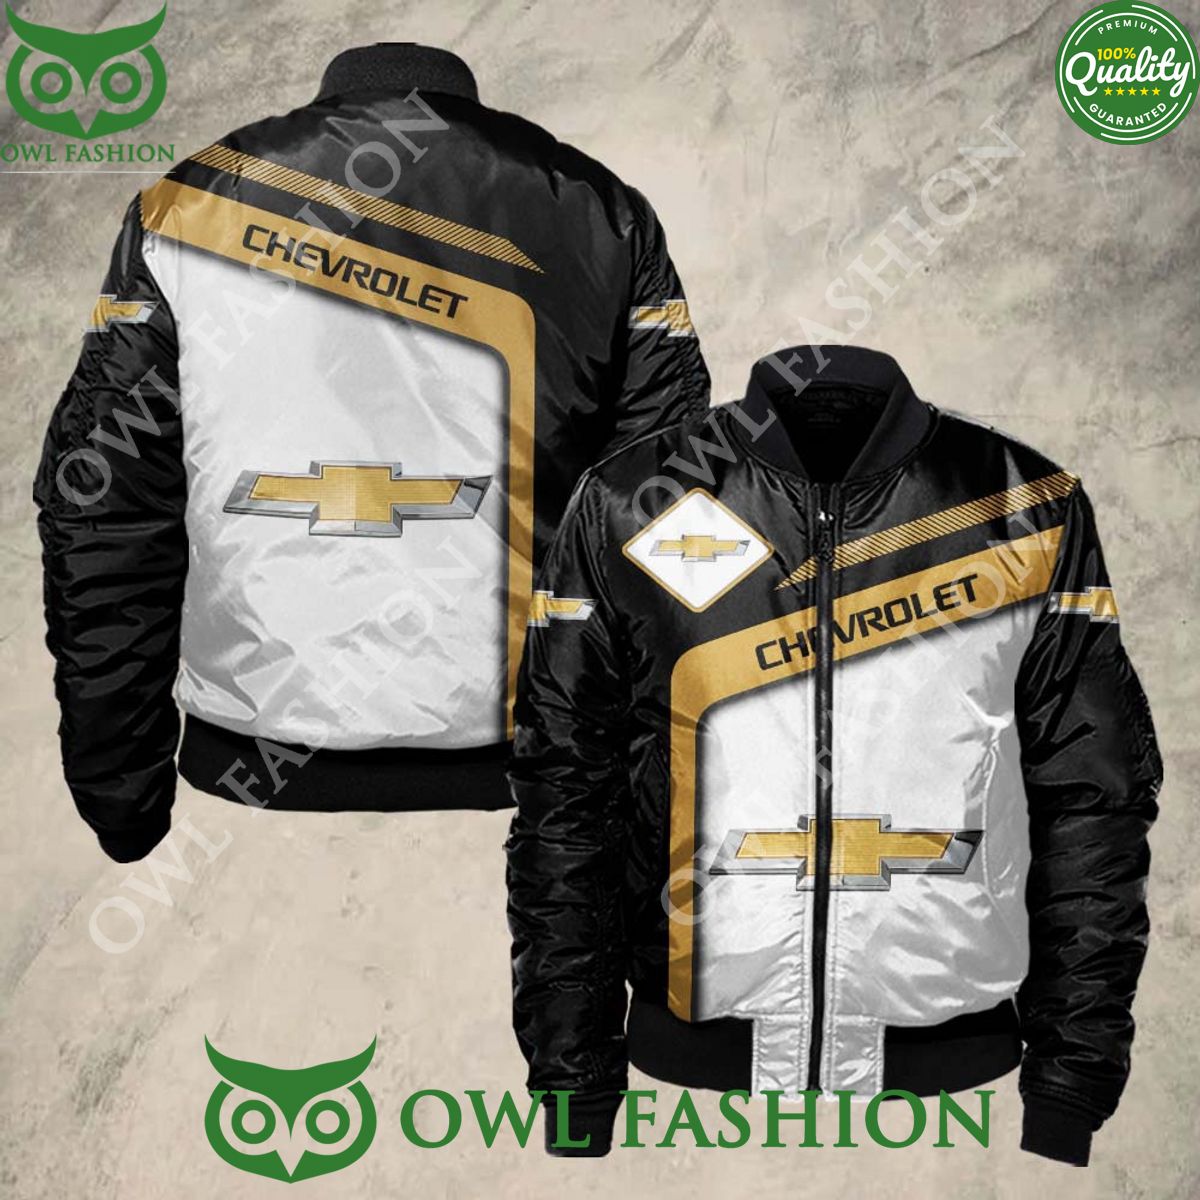 Trending Chevrolet Brand Bomber Jacket Printed Natural and awesome